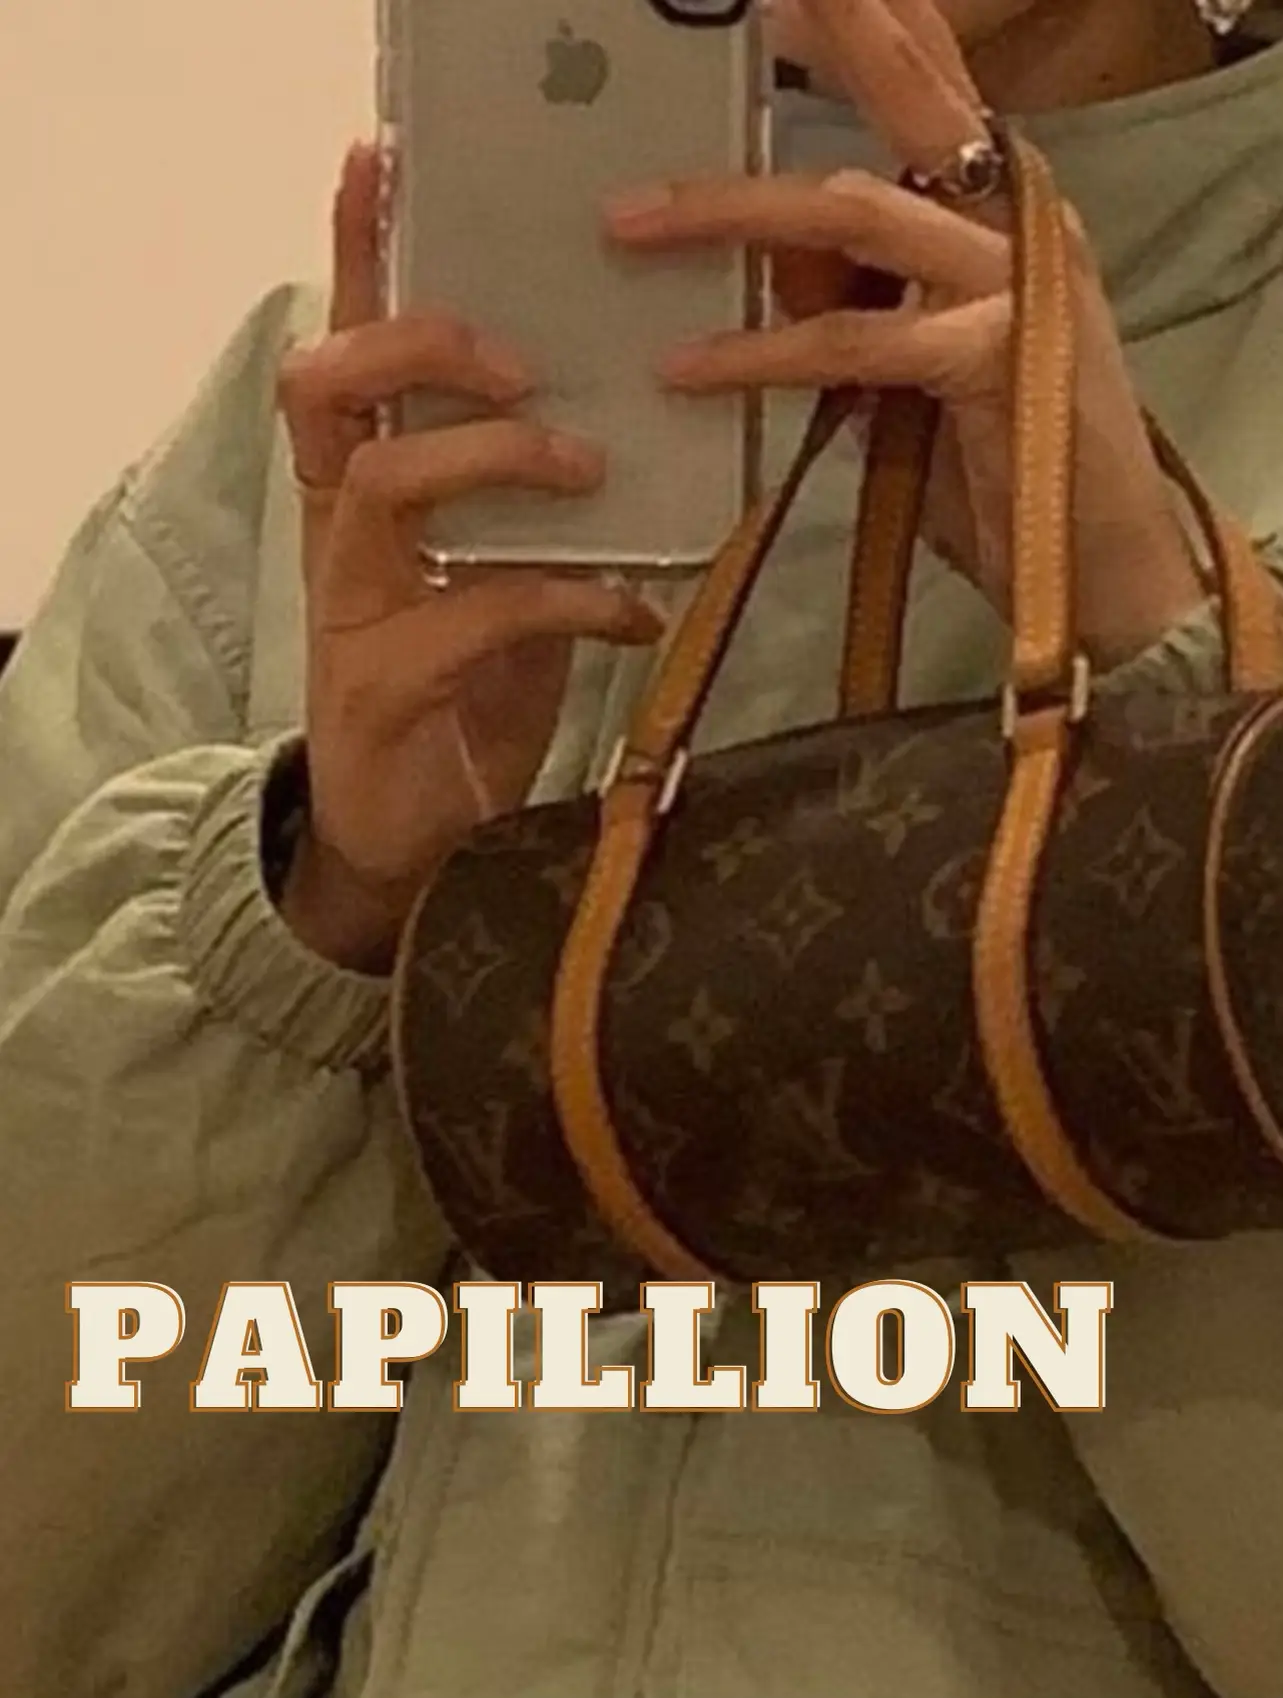 Authentic or not, I'm happy to have thrifted this vintage LV noe to use as  my workhorse bag! : r/ThriftStoreHauls